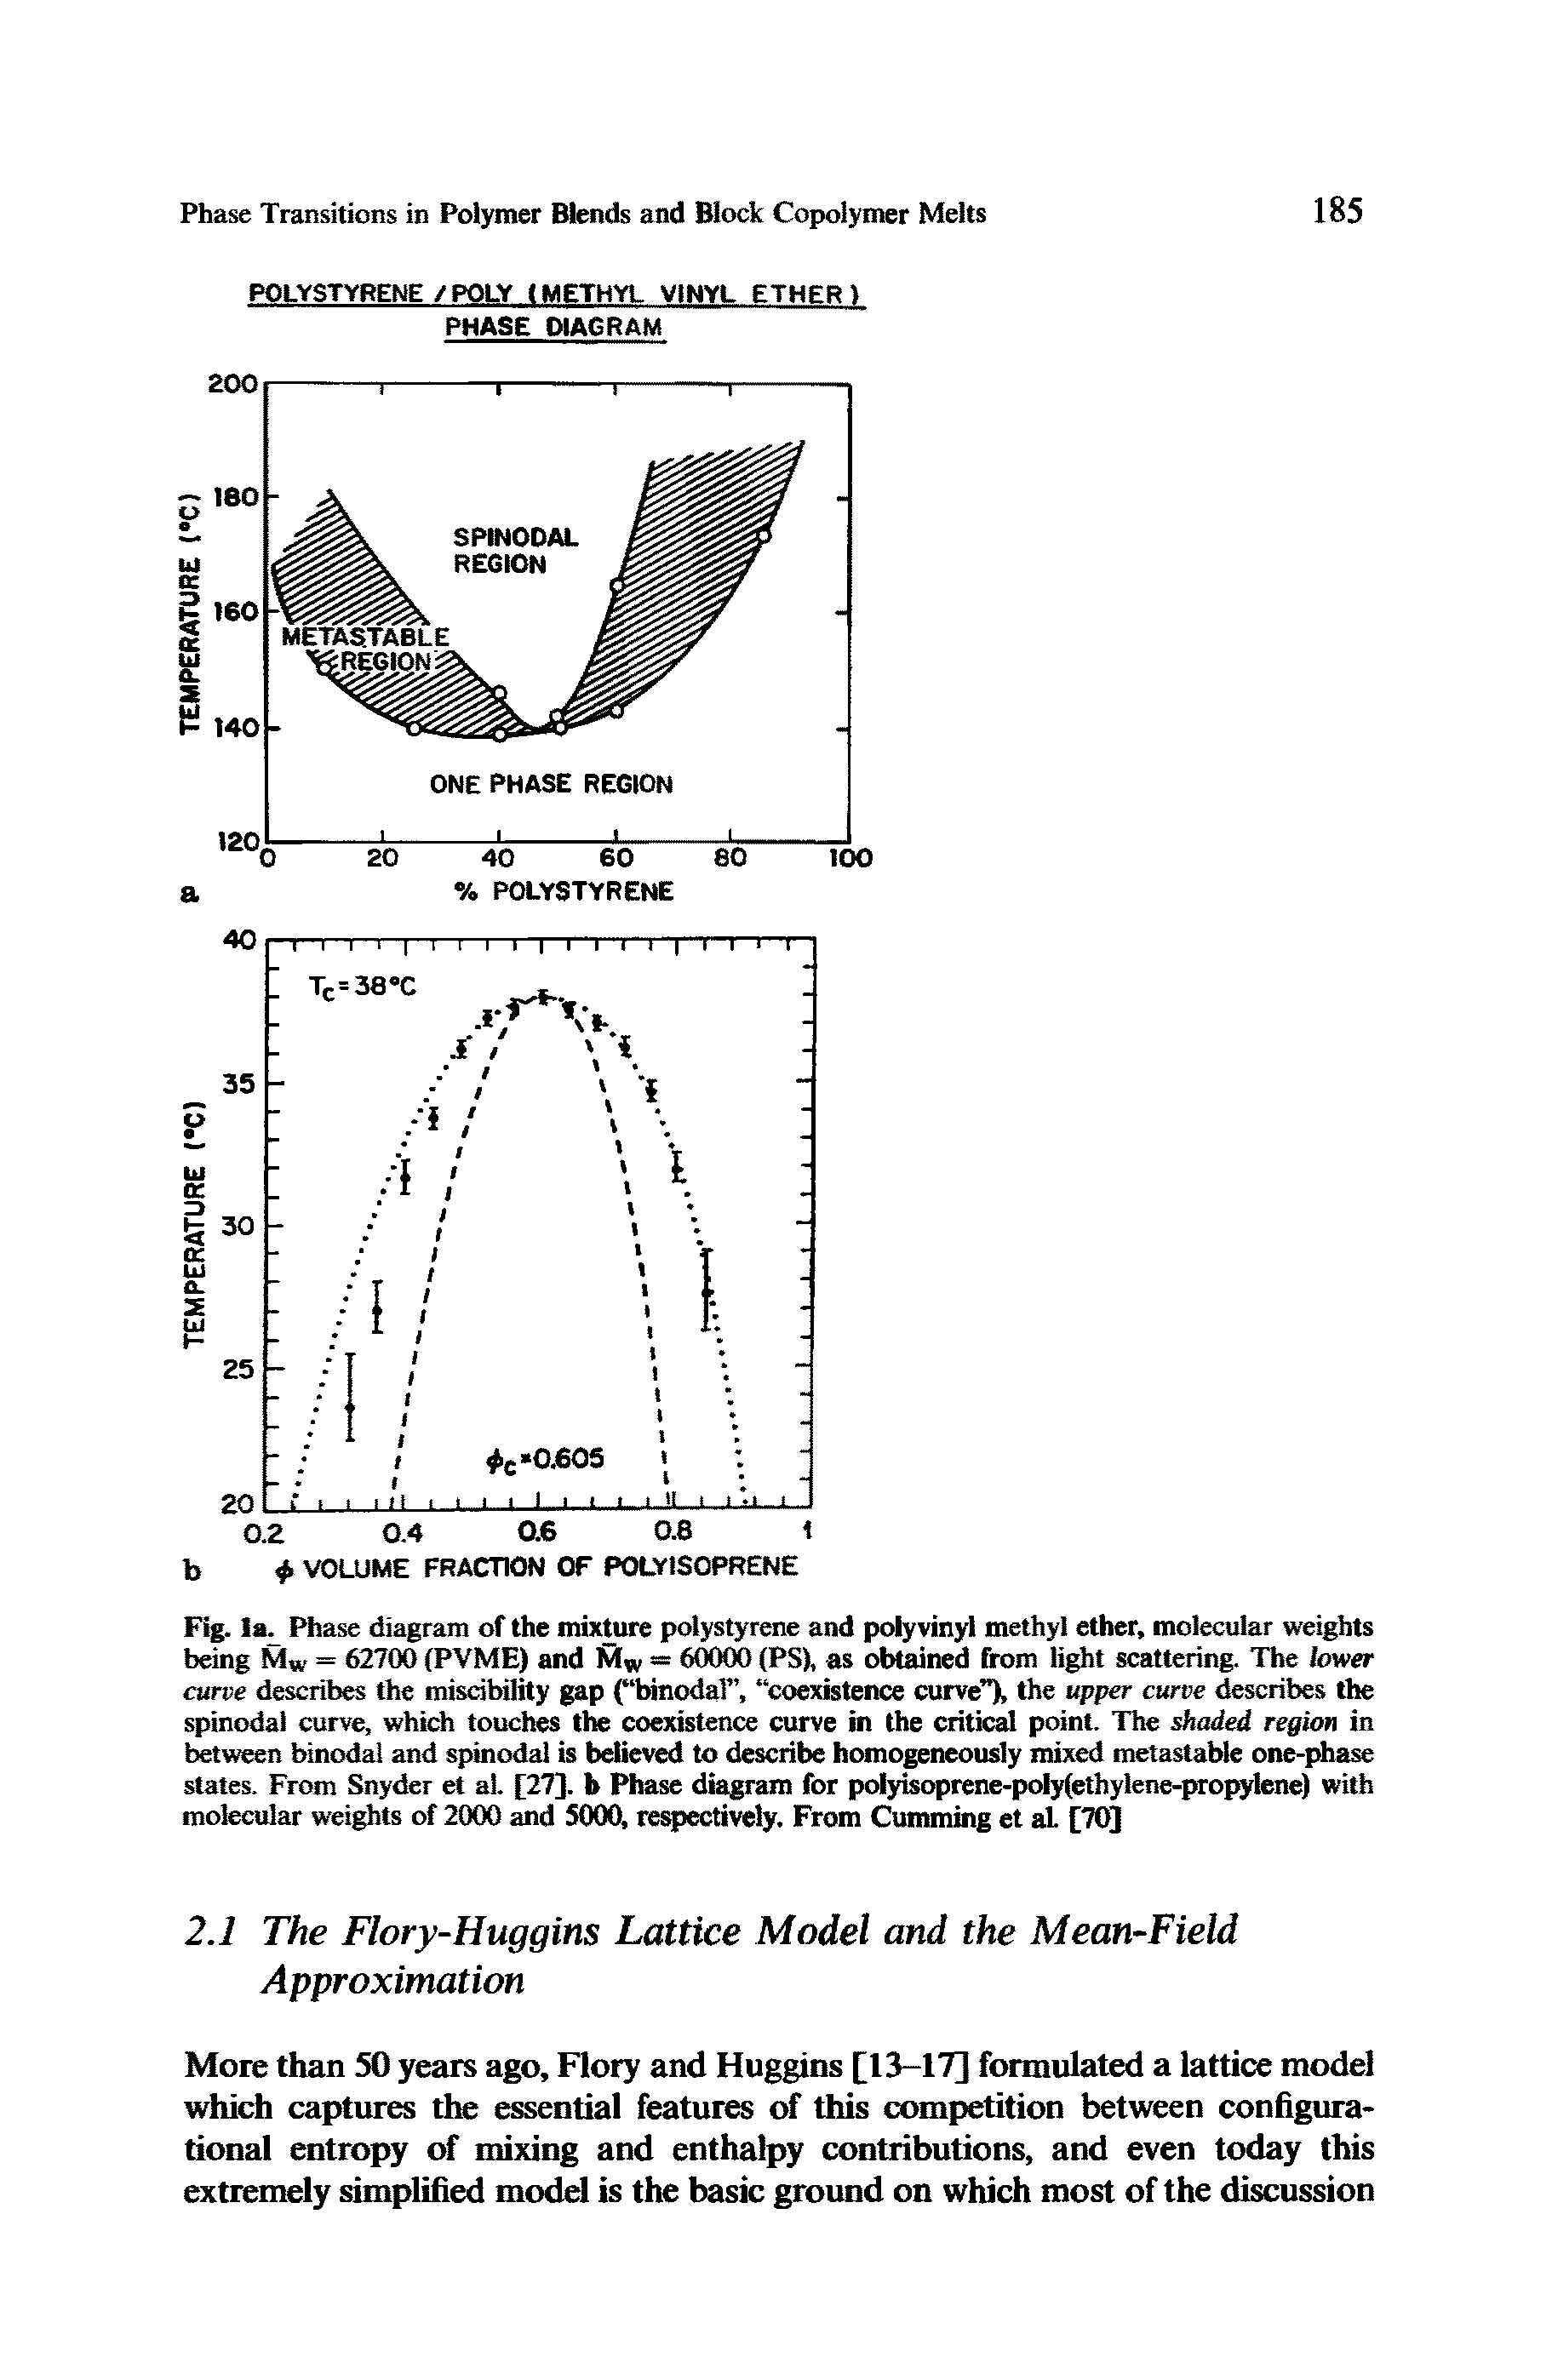 Fig. Phase diagram of the mixture polystyrene and polyvinyl methyl ether, molecular weights being = 62700 (PVME) and Mw = 60(W0 (PS), as obtained from light scattering. The lower curve describes the miscibility gap binodaF, coexistence curve ), the upper curve describes the spinodal curve, which touches the coexistence curve in the critical point. The shaded region in between binodal and spinodal is believed to describe homogeneously mixed metastable one-phase states. From Snyder et al. [27]. b Phase diagram for polyisoprene-poly(ethylene-propylene) with molecular weights of 2000 and 5000, respectively. From Cumming et al [70]...